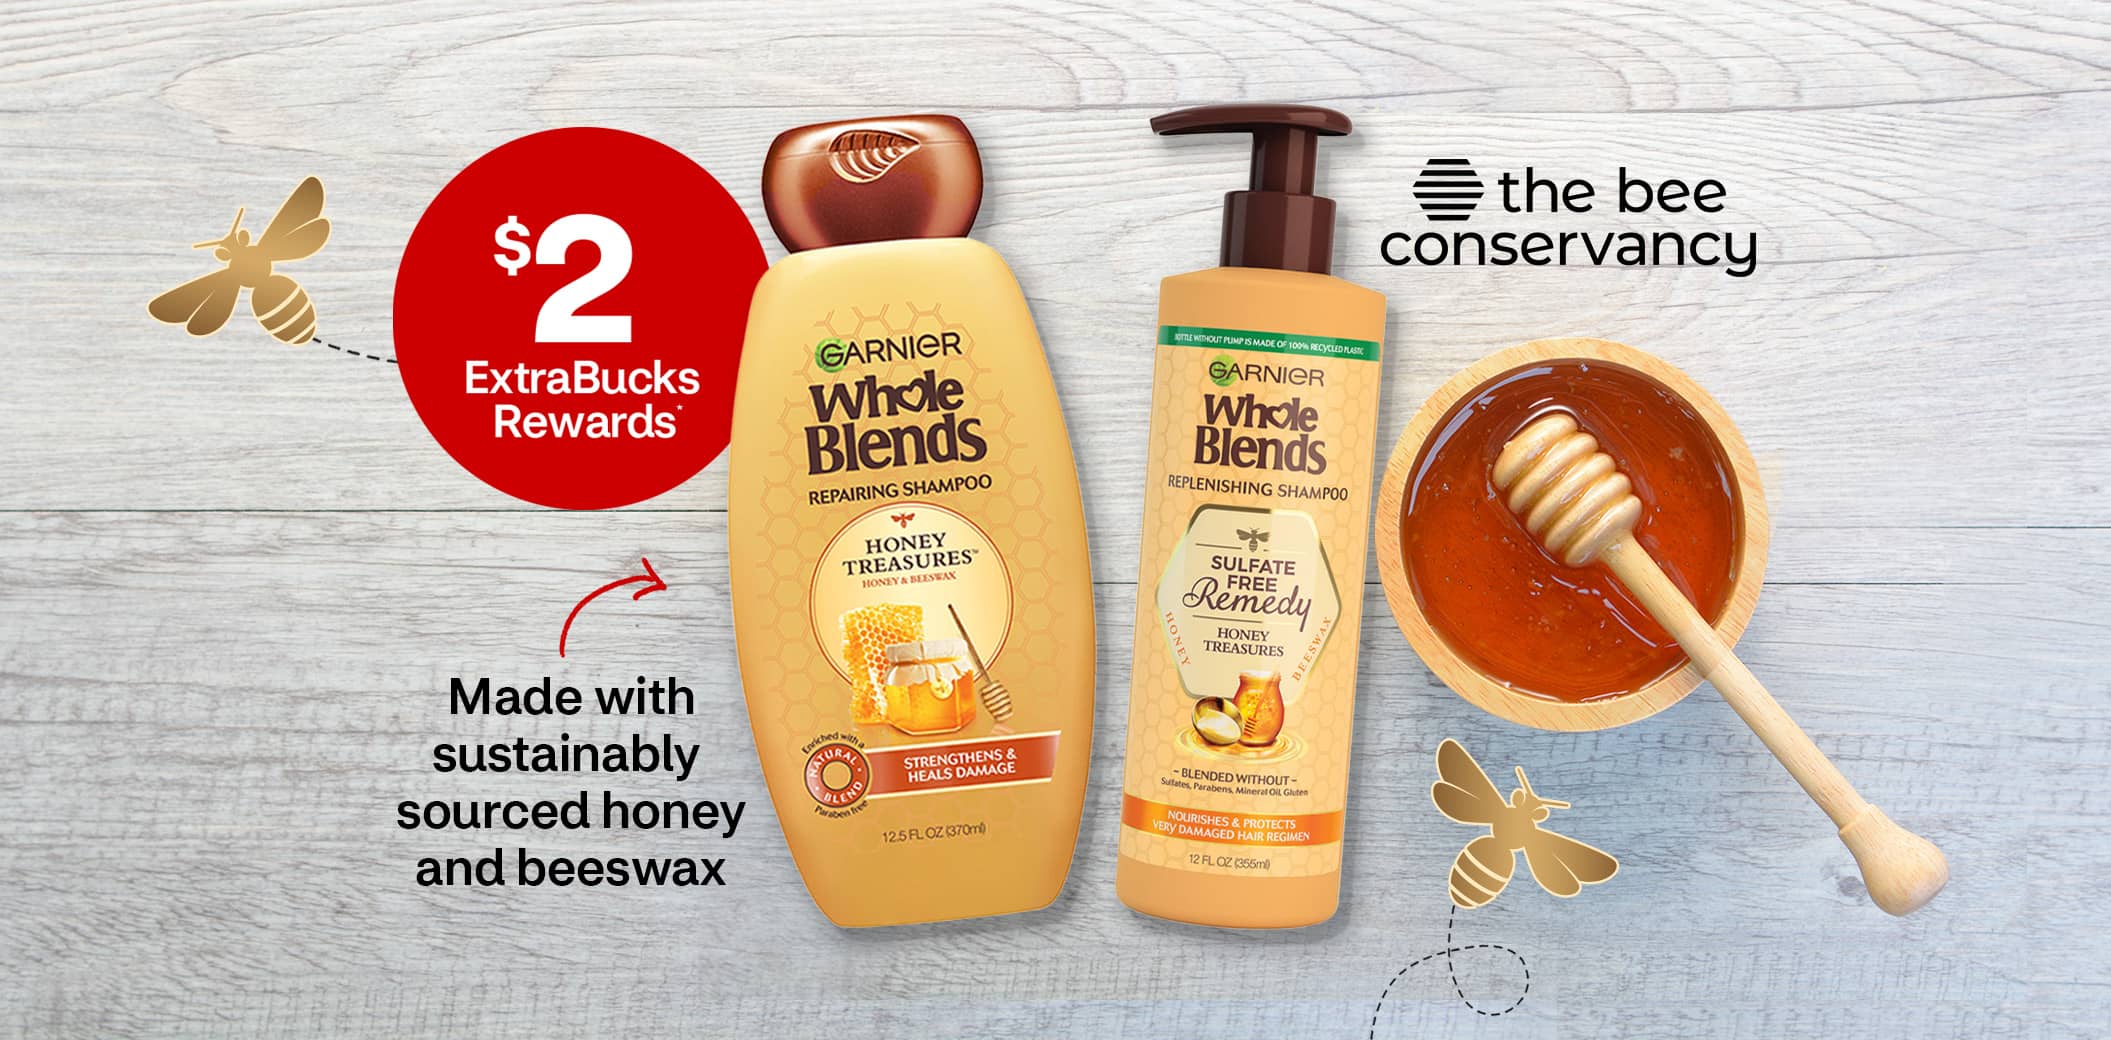 $2 ExtraBucks Rewards®, made with sustainable sourced honey and beeswax, the bee conservancy logo